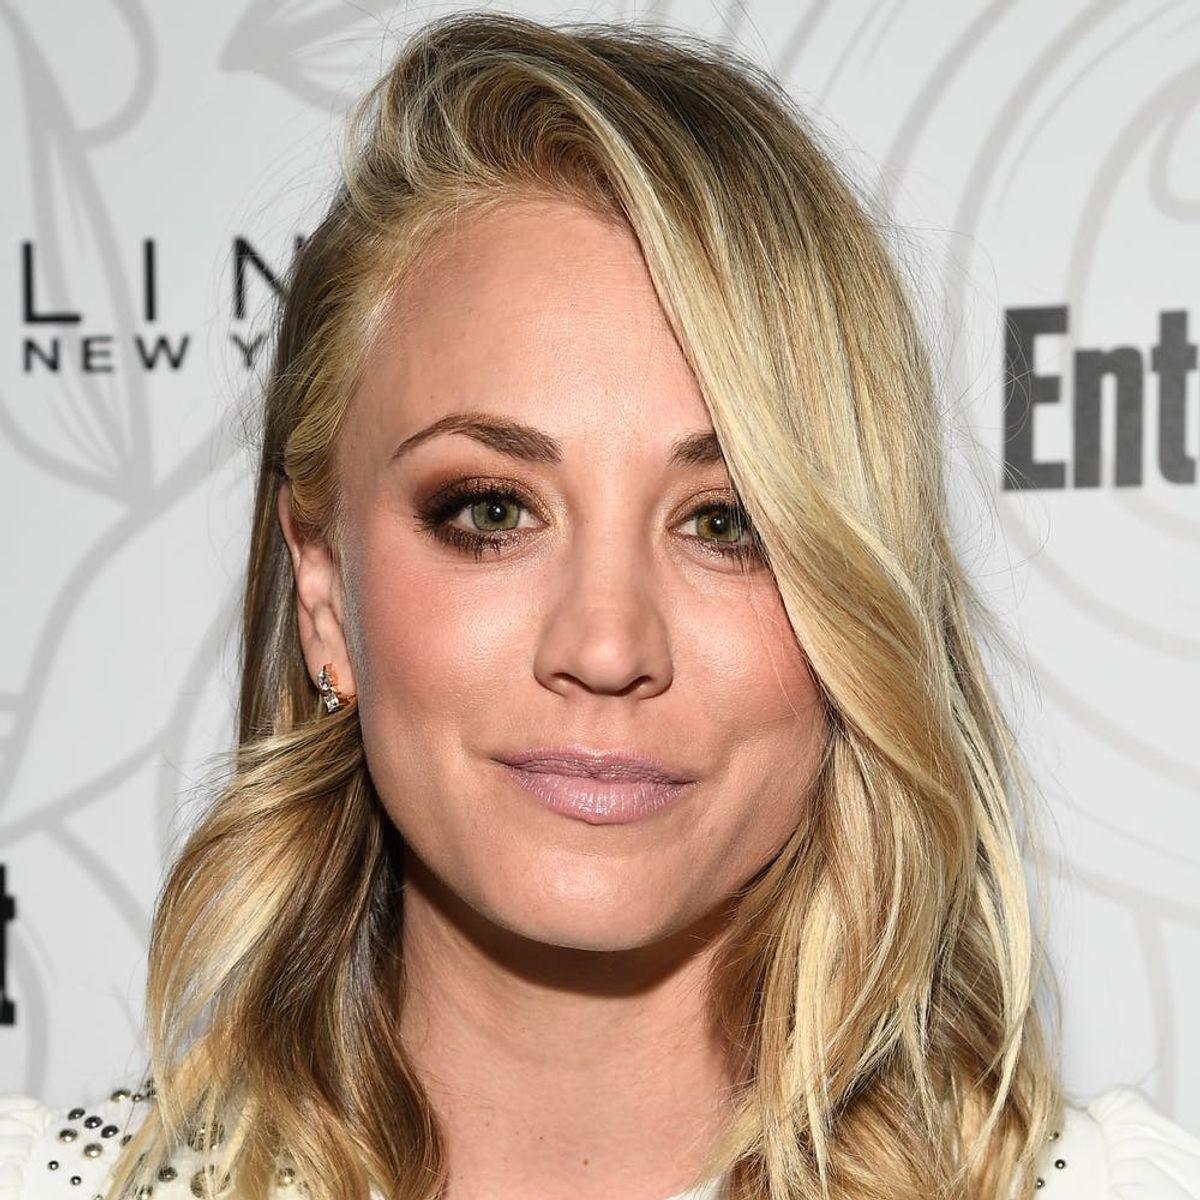 Kaley Cuoco Dyed Her Hair Icy Blonde for the Summer